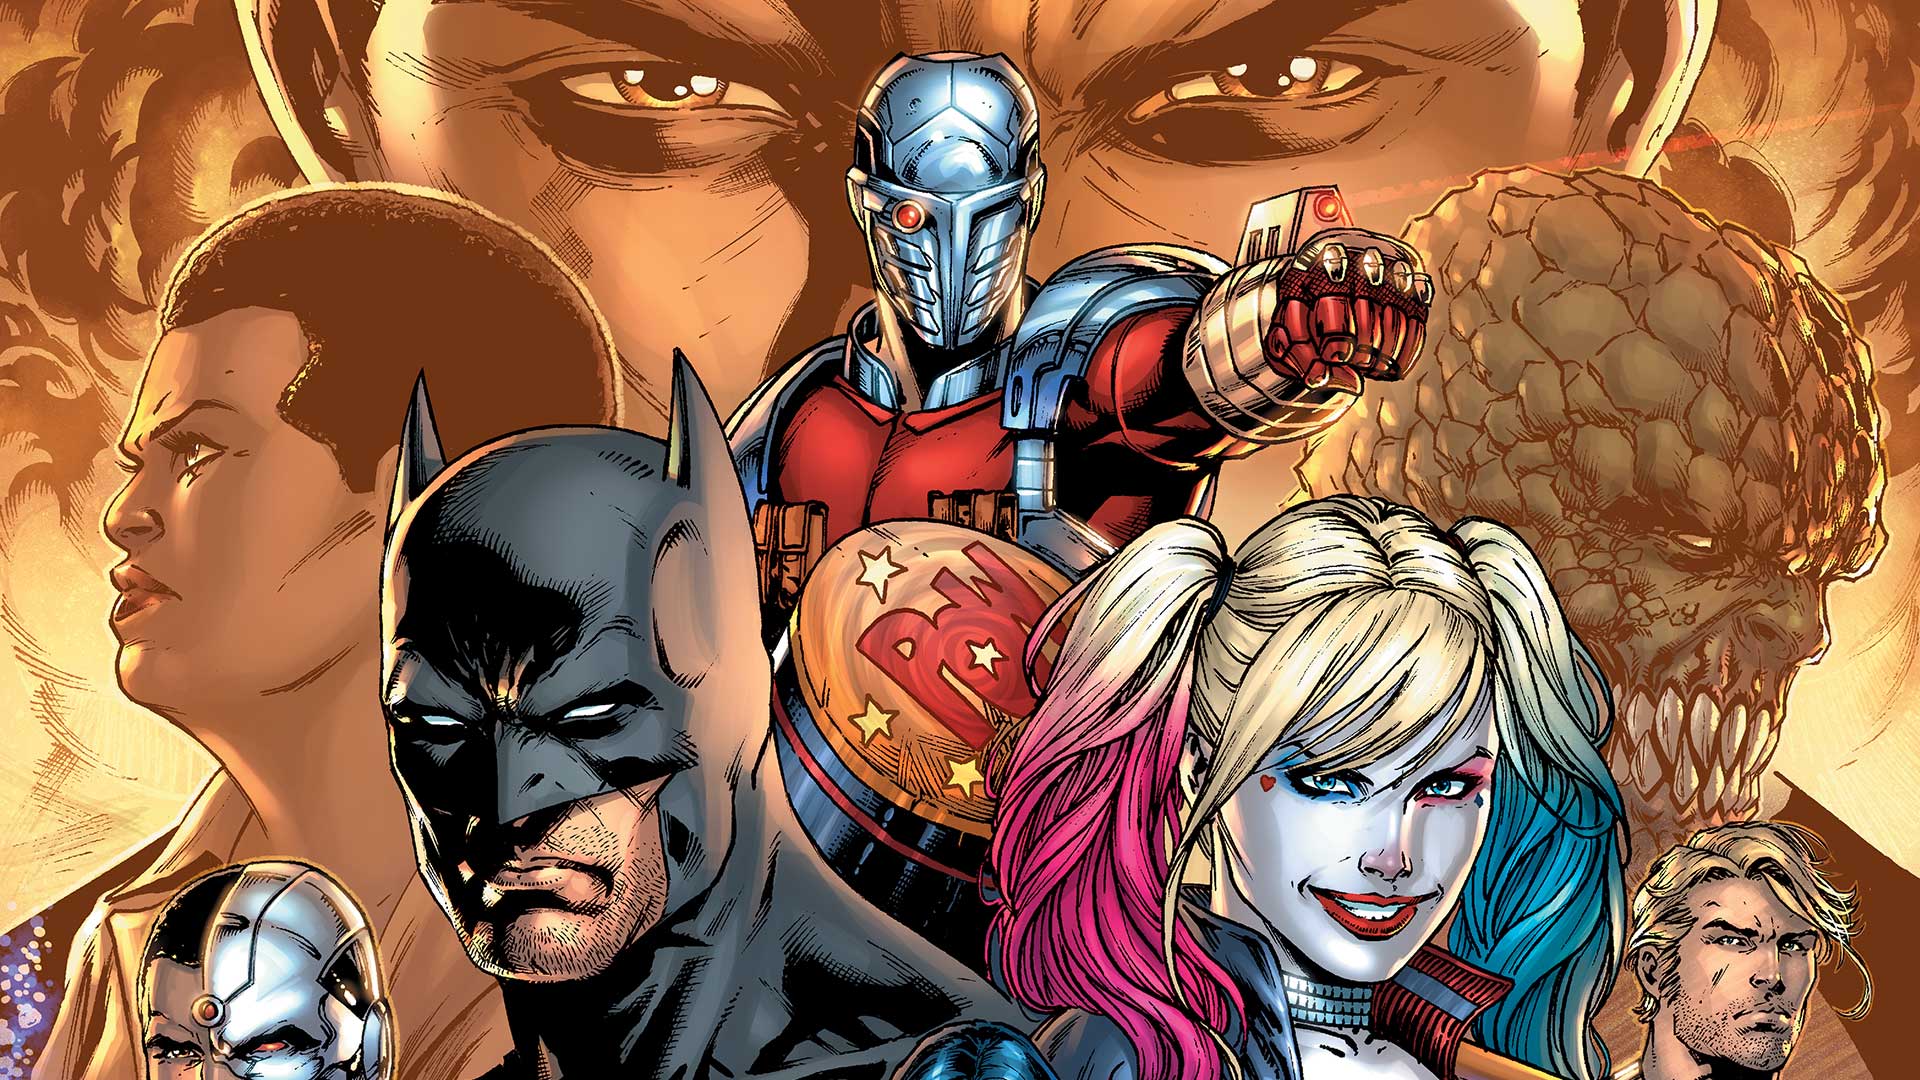 Justice League VS Suicide Squad Review By Deffinition as part of Graphic Novel Talk